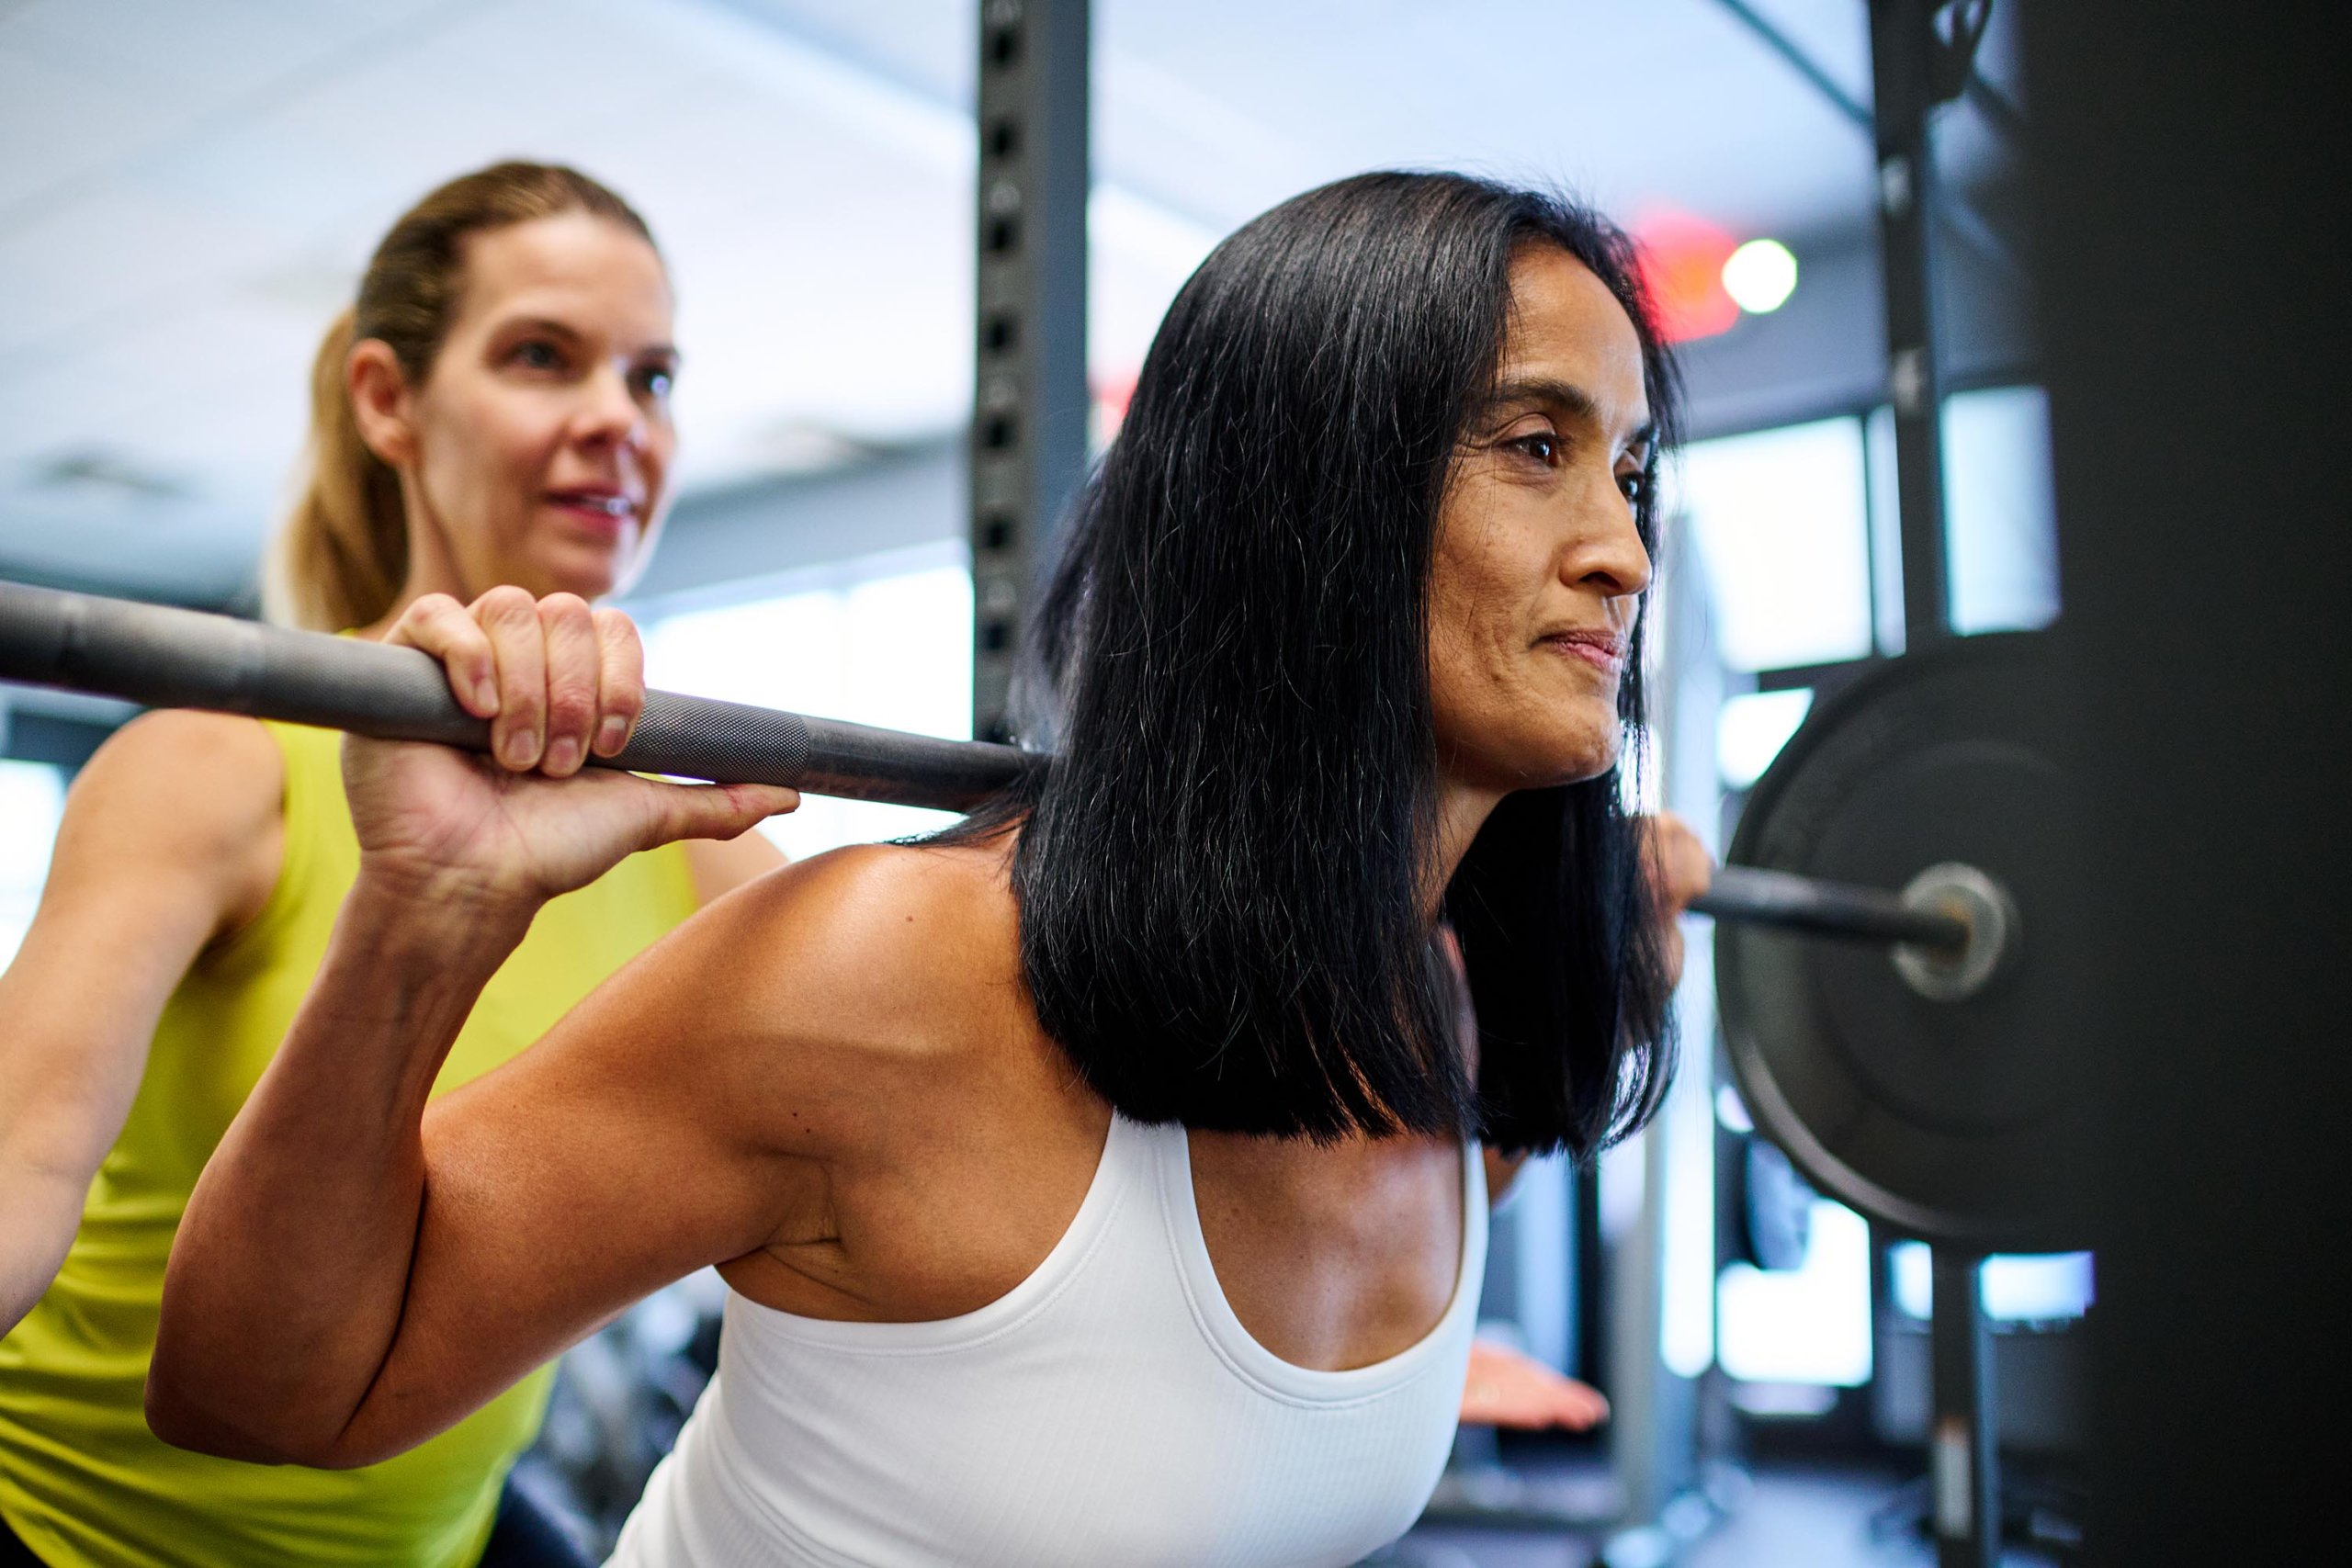 Woman practicing kettlebell squat with personal trainer at gym